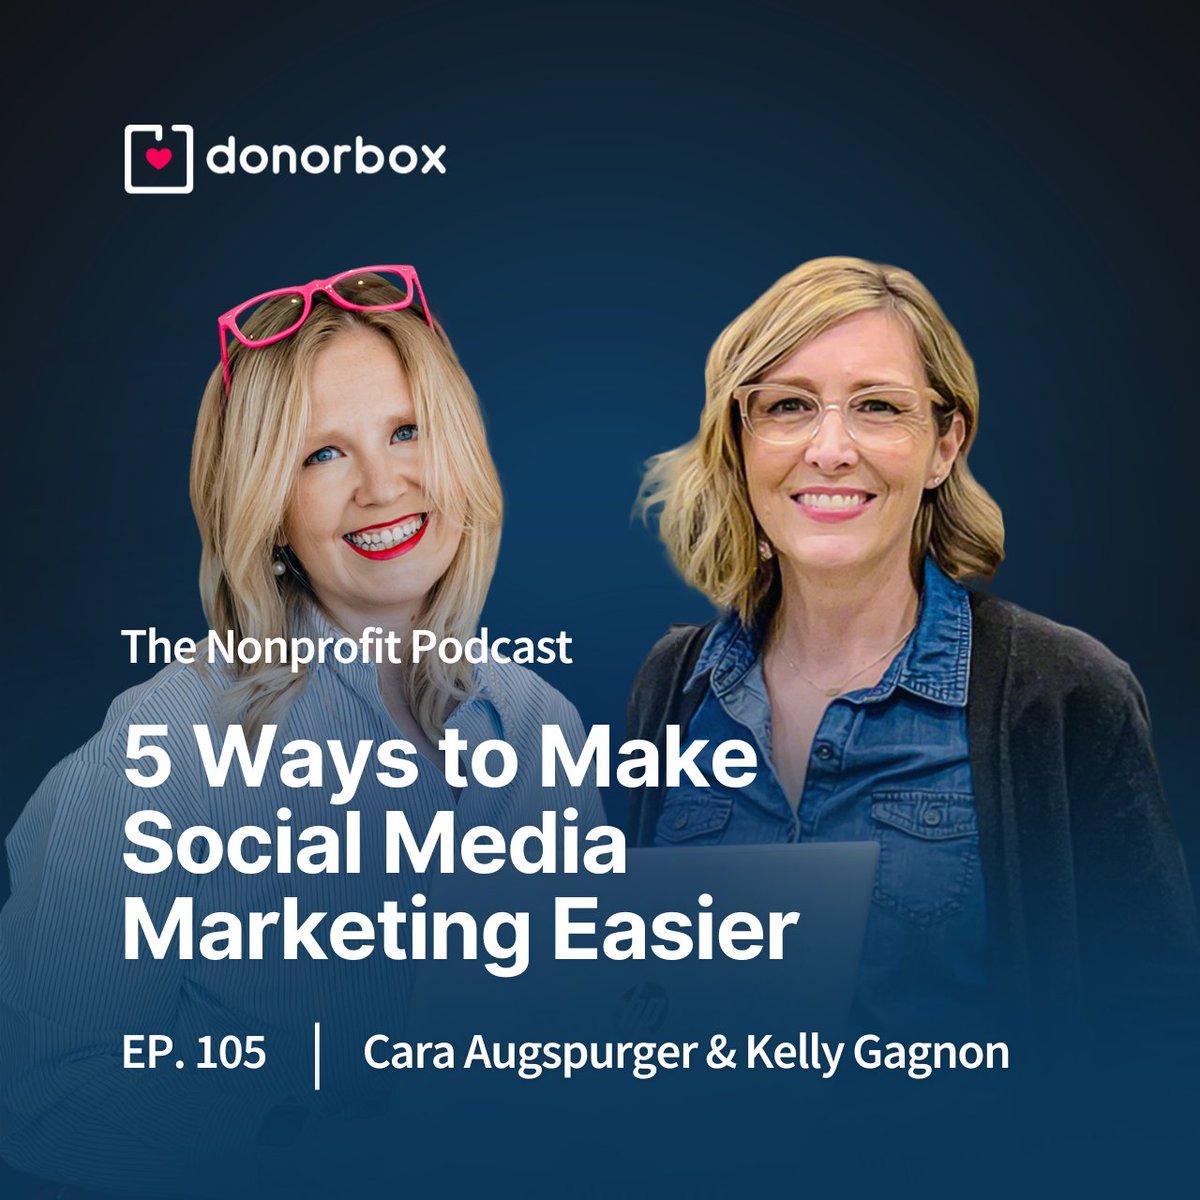 Boost your nonprofit's social media with 5 expert tips from Kelly Gagnon, CEO of Nonprofit Marketing Nerd! 🚀 Plan, engage, and create like a pro. YouTube: ow.ly/Ujy850QTspz Apple Podcasts: ow.ly/STUe50QTspA Spotify: ow.ly/f6Wa50QTspB #nonprofitmarketing